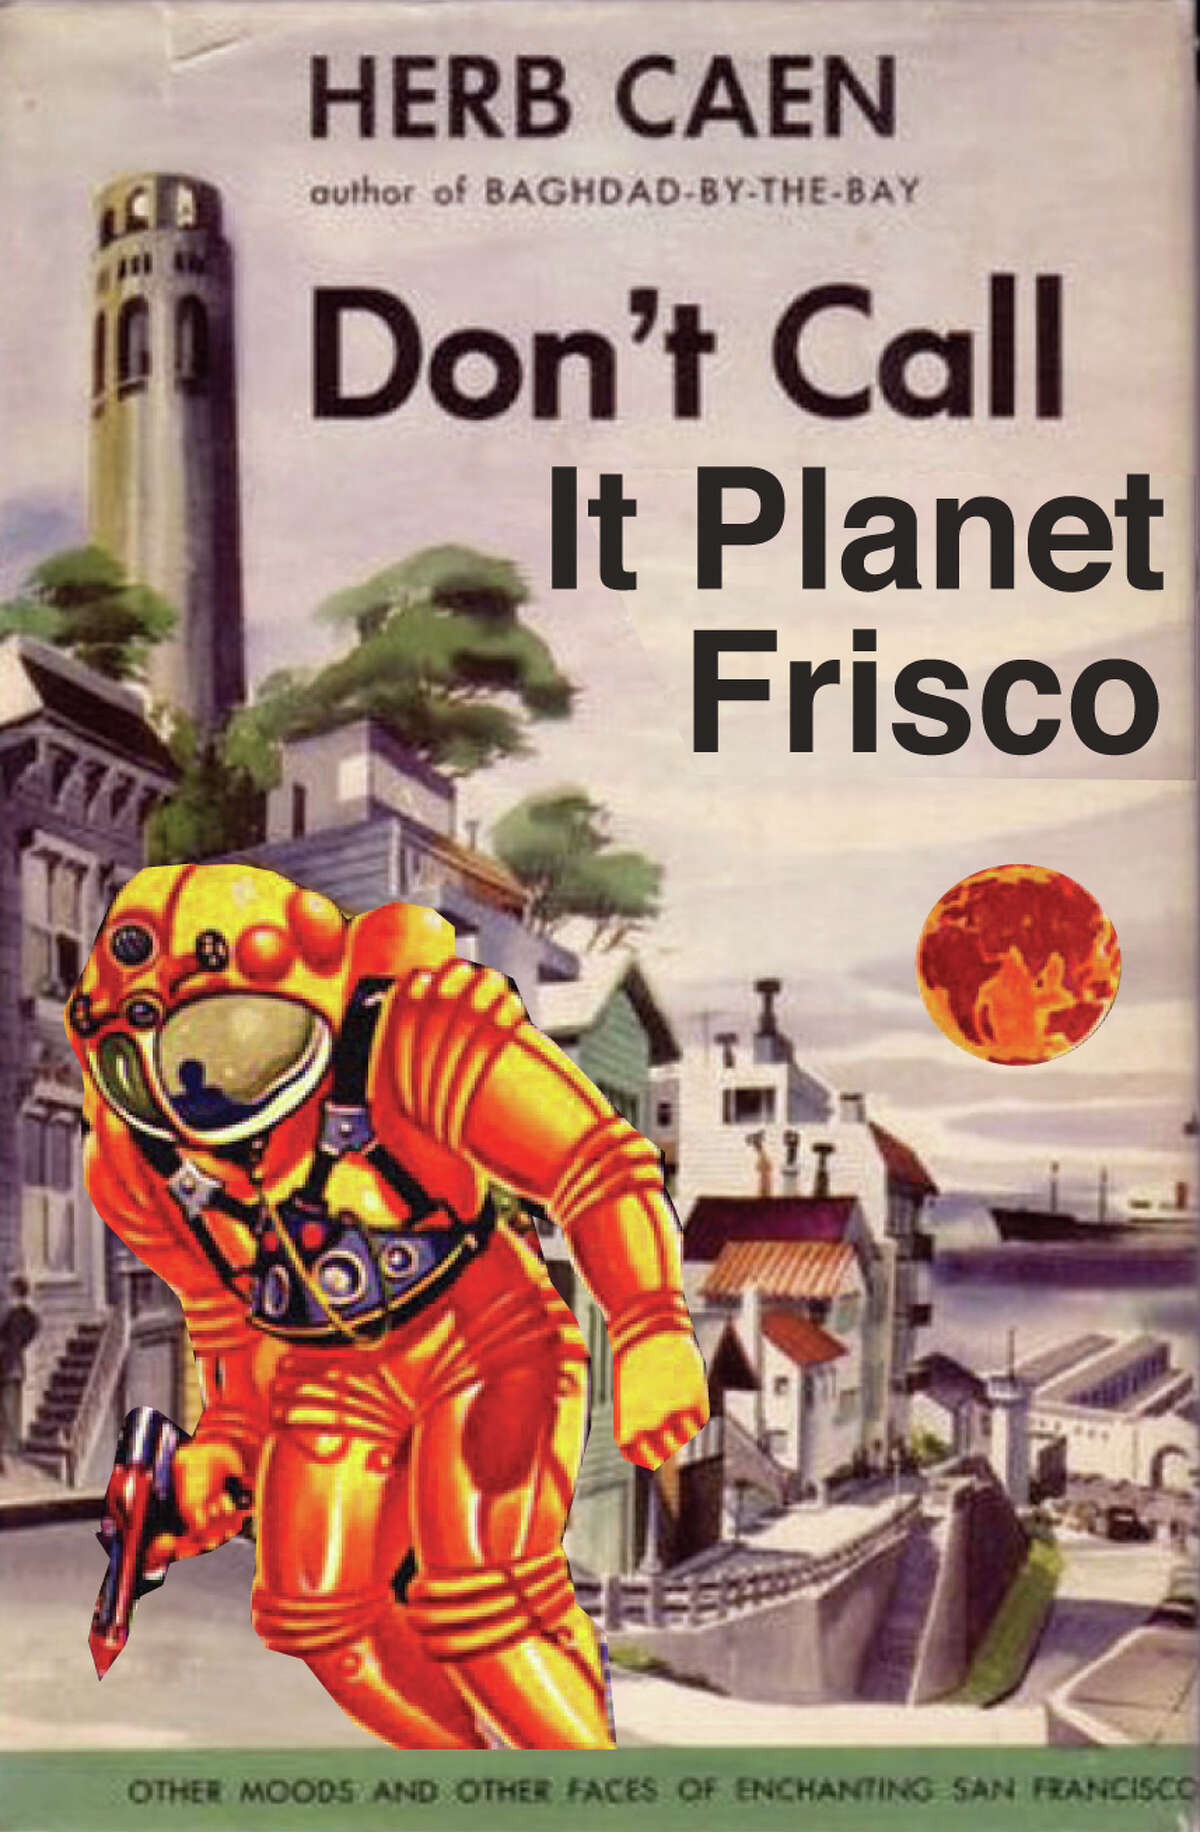 Herb Caen's failed 1953 science fiction novel, the dystopian "Don't Call It Planet Frisco."